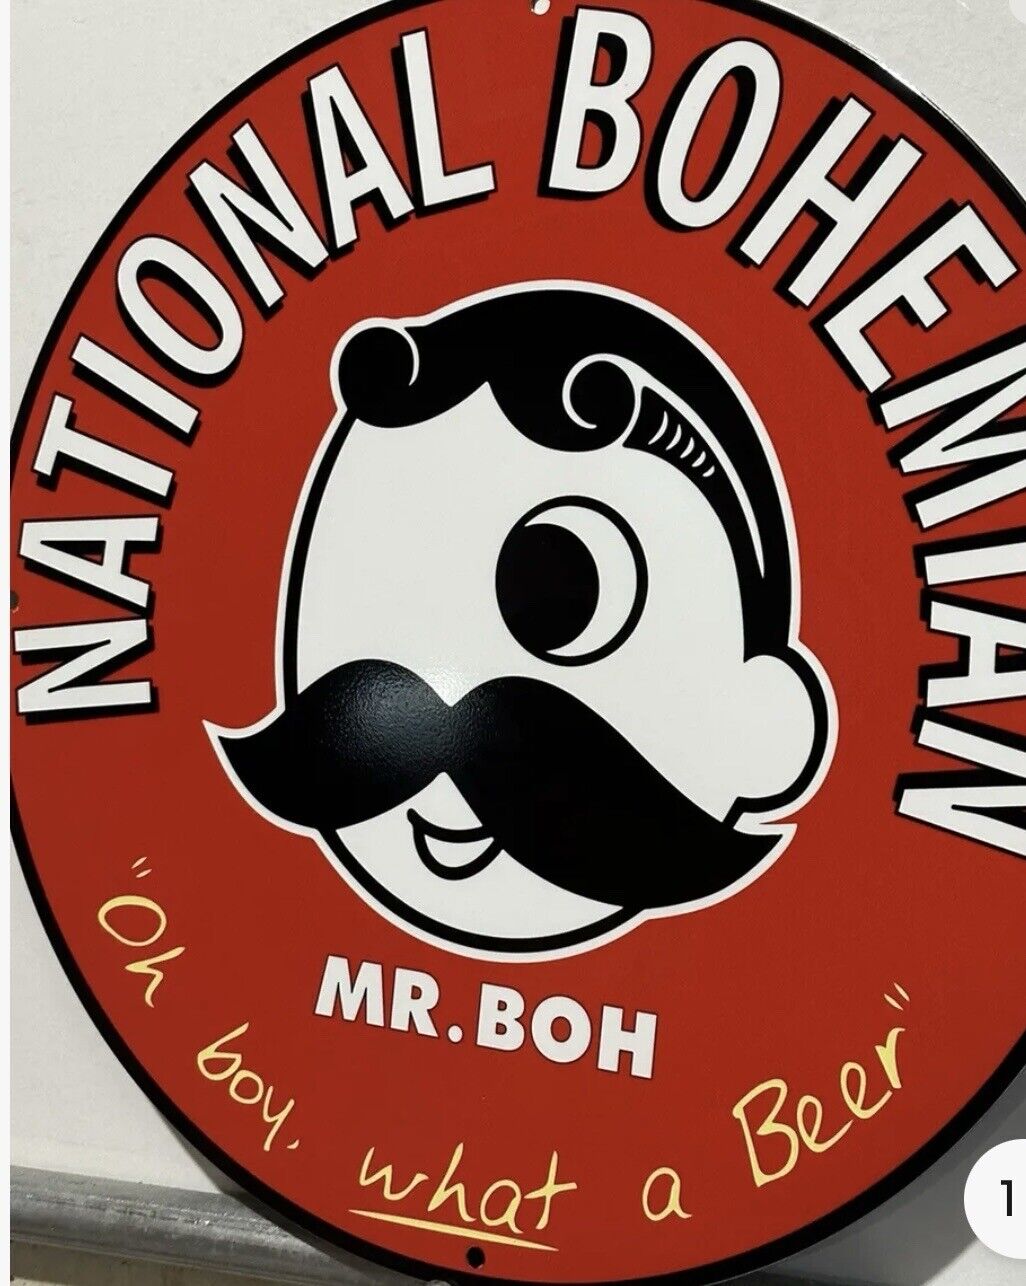 Top Quality  Mr. BOH  National Bohemian Beer vintage reproduction Garage Sign